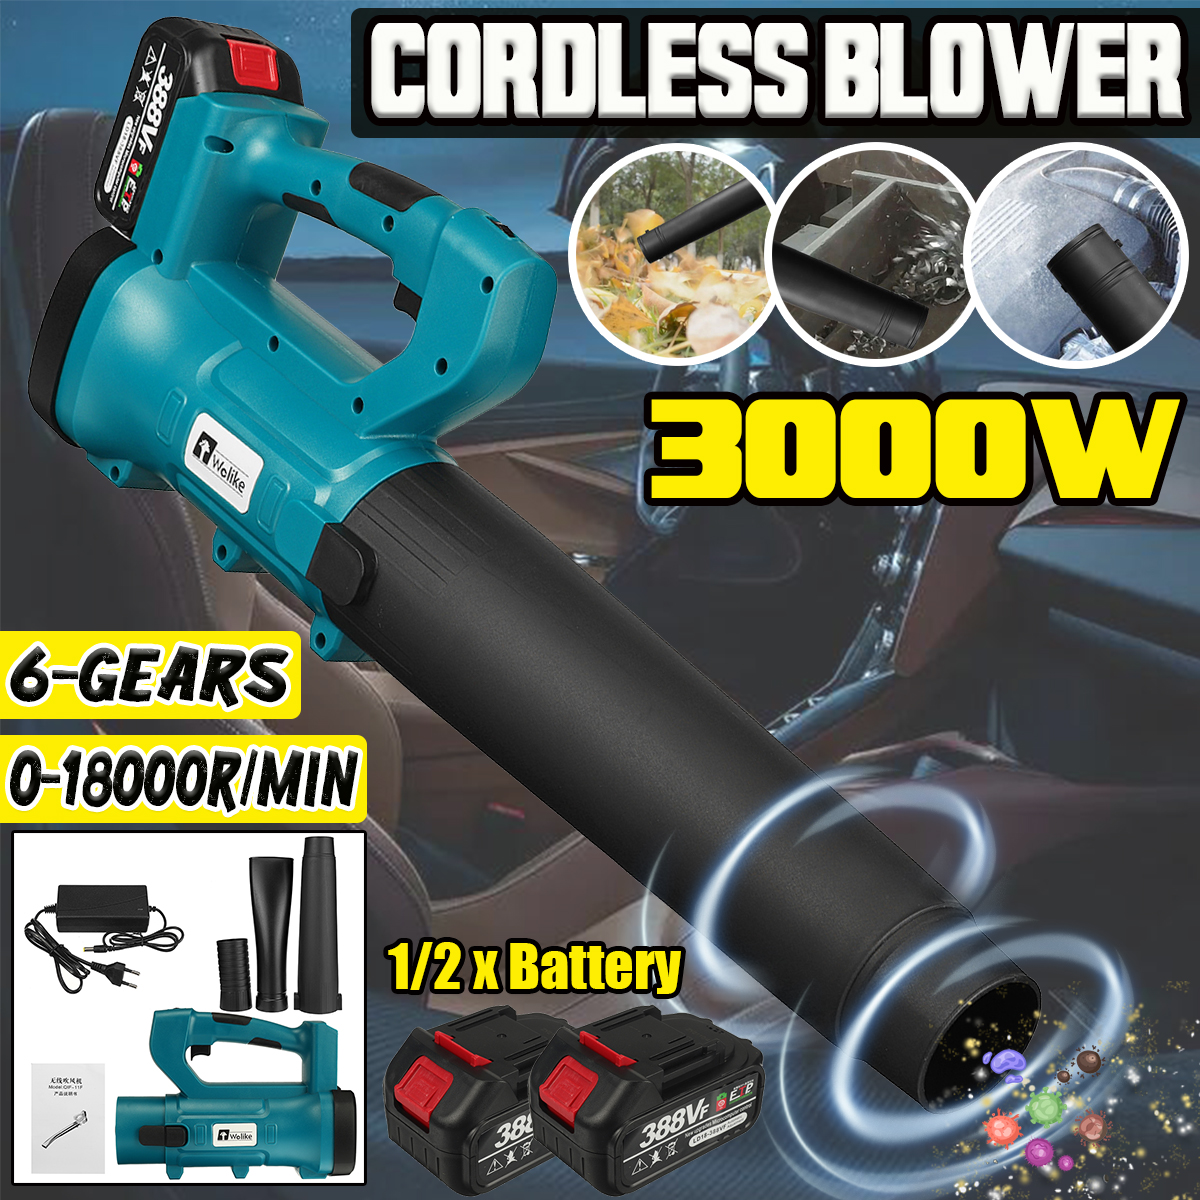 Wolike-388VF-Cordless-Air-Blower-3000W-High-Power-Snow-Blower-Portable-Electric-Rechargeable-Leaf-Bl-1918502-1